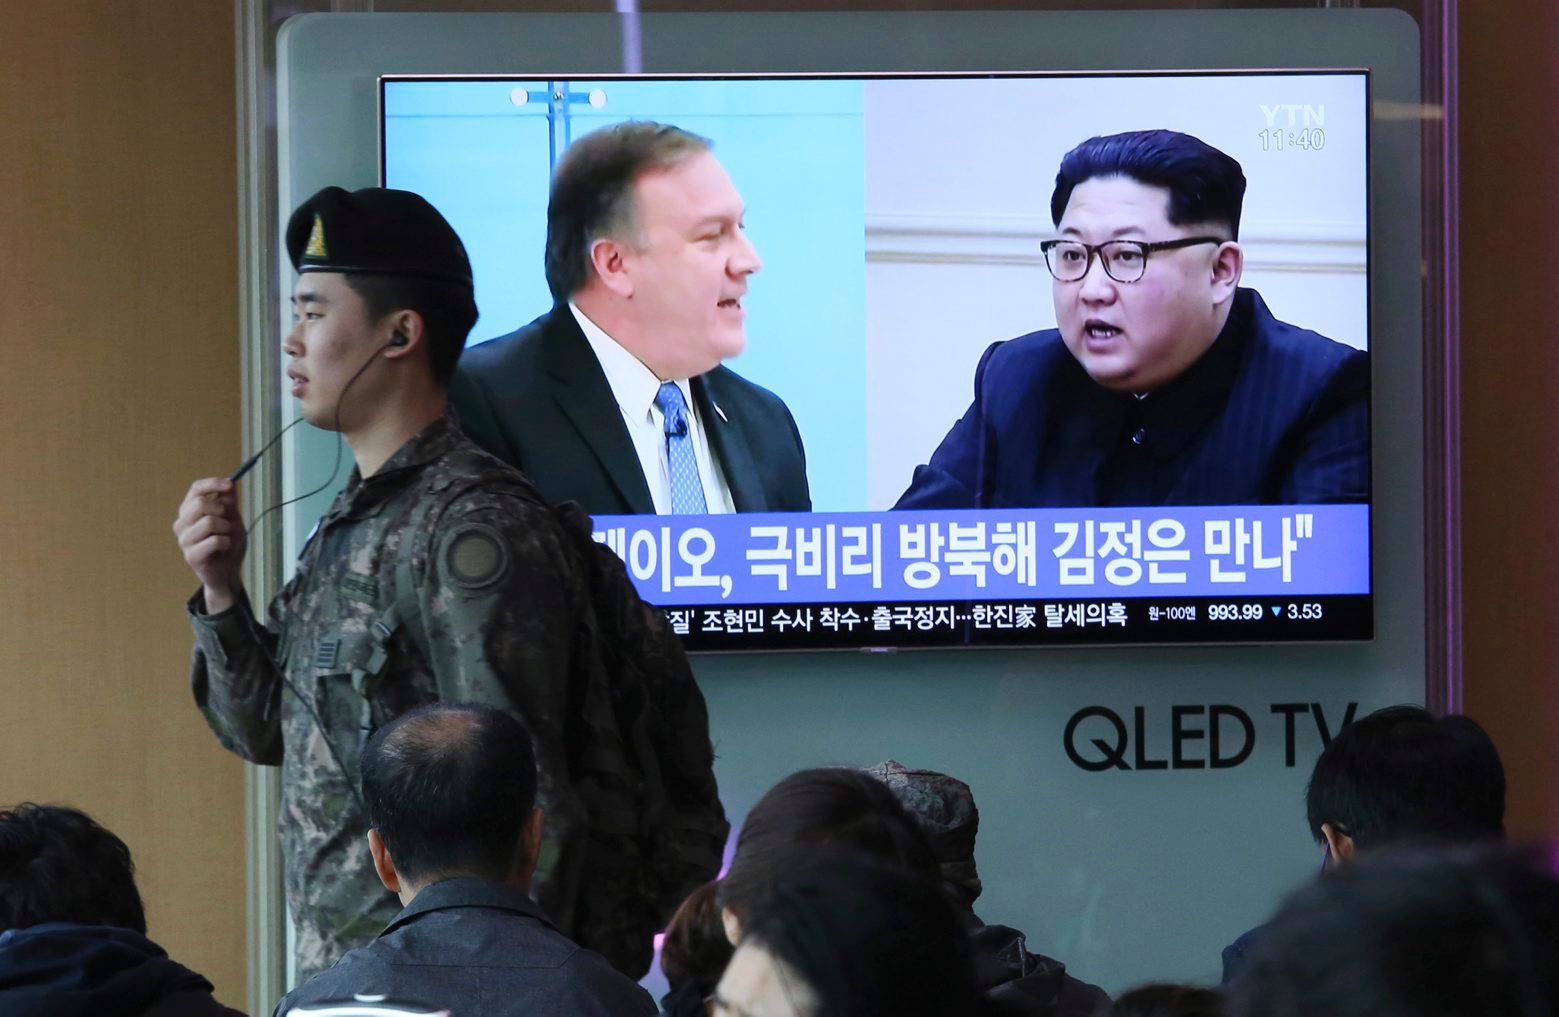 A South Korean army soldier passes by a TV screen showing file footage of CIA Director Mike Pompeo, left, and North Korean leader Kim Jong Un during a news program at the Seoul Railway Station in Seoul, South Korea, Wednesday, April 18, 2018. Pompeo recently traveled to North Korea to meet with leader Kim Jong Un, a highly unusual, secret visit undertaken as the enemy nations prepare for a meeting between President Donald Trump and North Korean leader Kim Jong Un. The signs read: " Mike Pompeo meets with Kim Jong Un." (AP Photo/Ahn Young-joon) South Korea United States North Korea